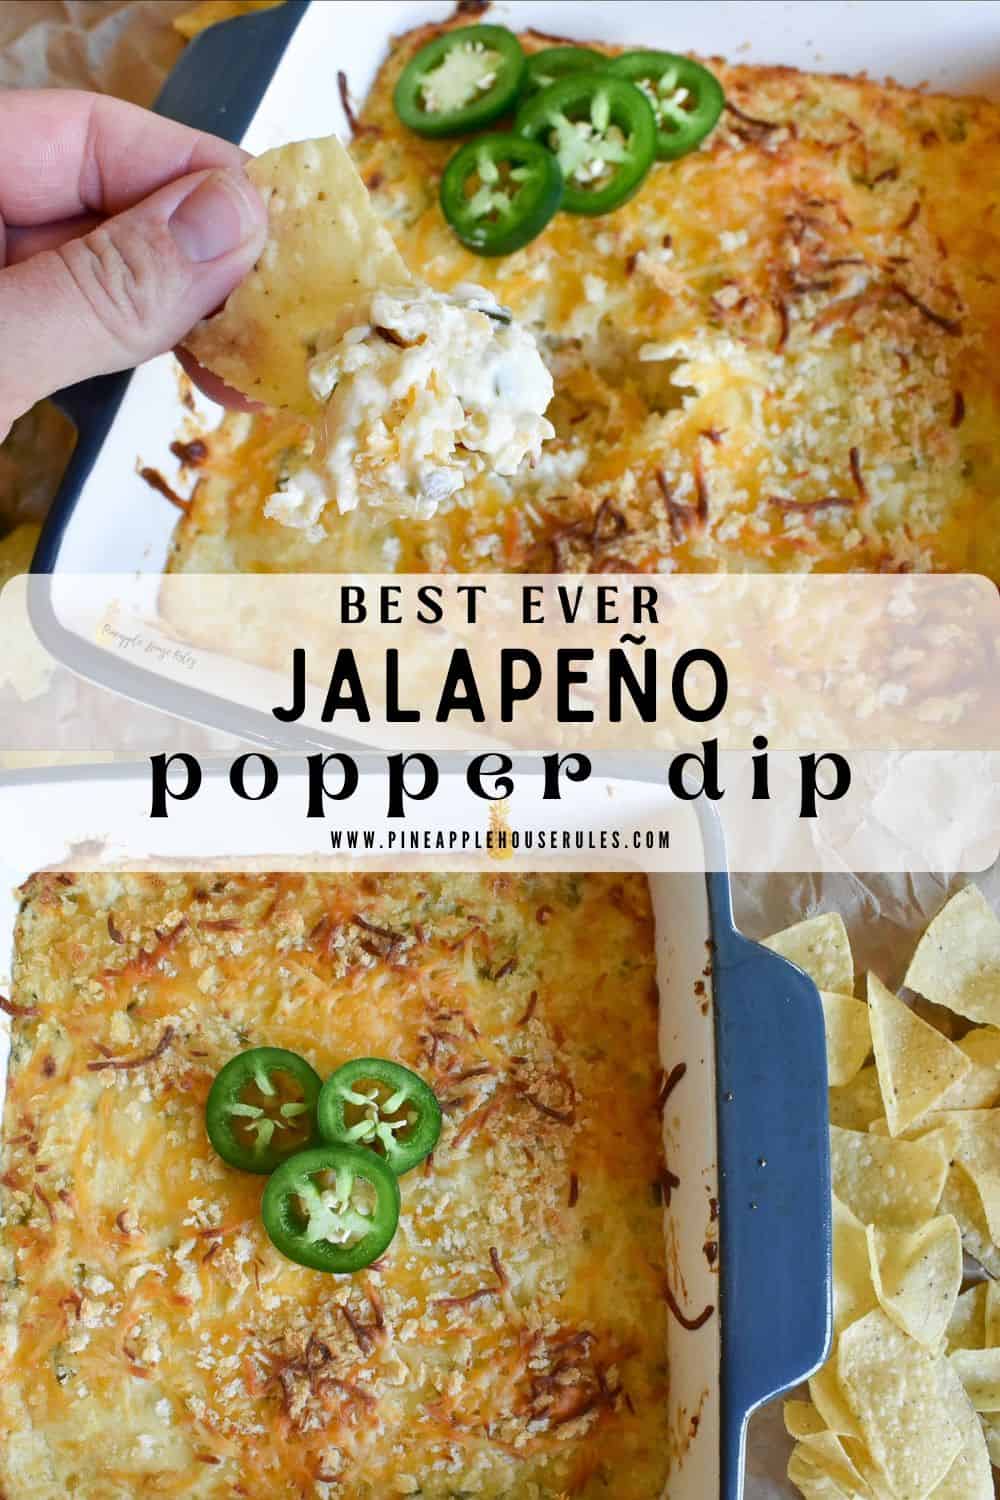 Jalapeño Popper Dip is an easy, delicious dip appetizer recipe that's a hit with every crowd! Serve it with tortilla chips. Jalapeño Popper Dip | Jalapeño Popper Dip Recipe | Jalapeno Popper Dip Easy | Jalapeno Popper Dip Keto | Jalapeno Popper Dip No Bacon | Dip Recipes | Dip Recipes for Parties | Dip Recipes Easy | Dip Recipes for Chips | Dips | Dips and Appetizers | Dips Recipes | Dips with Tortilla Chips | Dips and Appetizers Easy | Appetizer Recipes | Jalapeno Popper